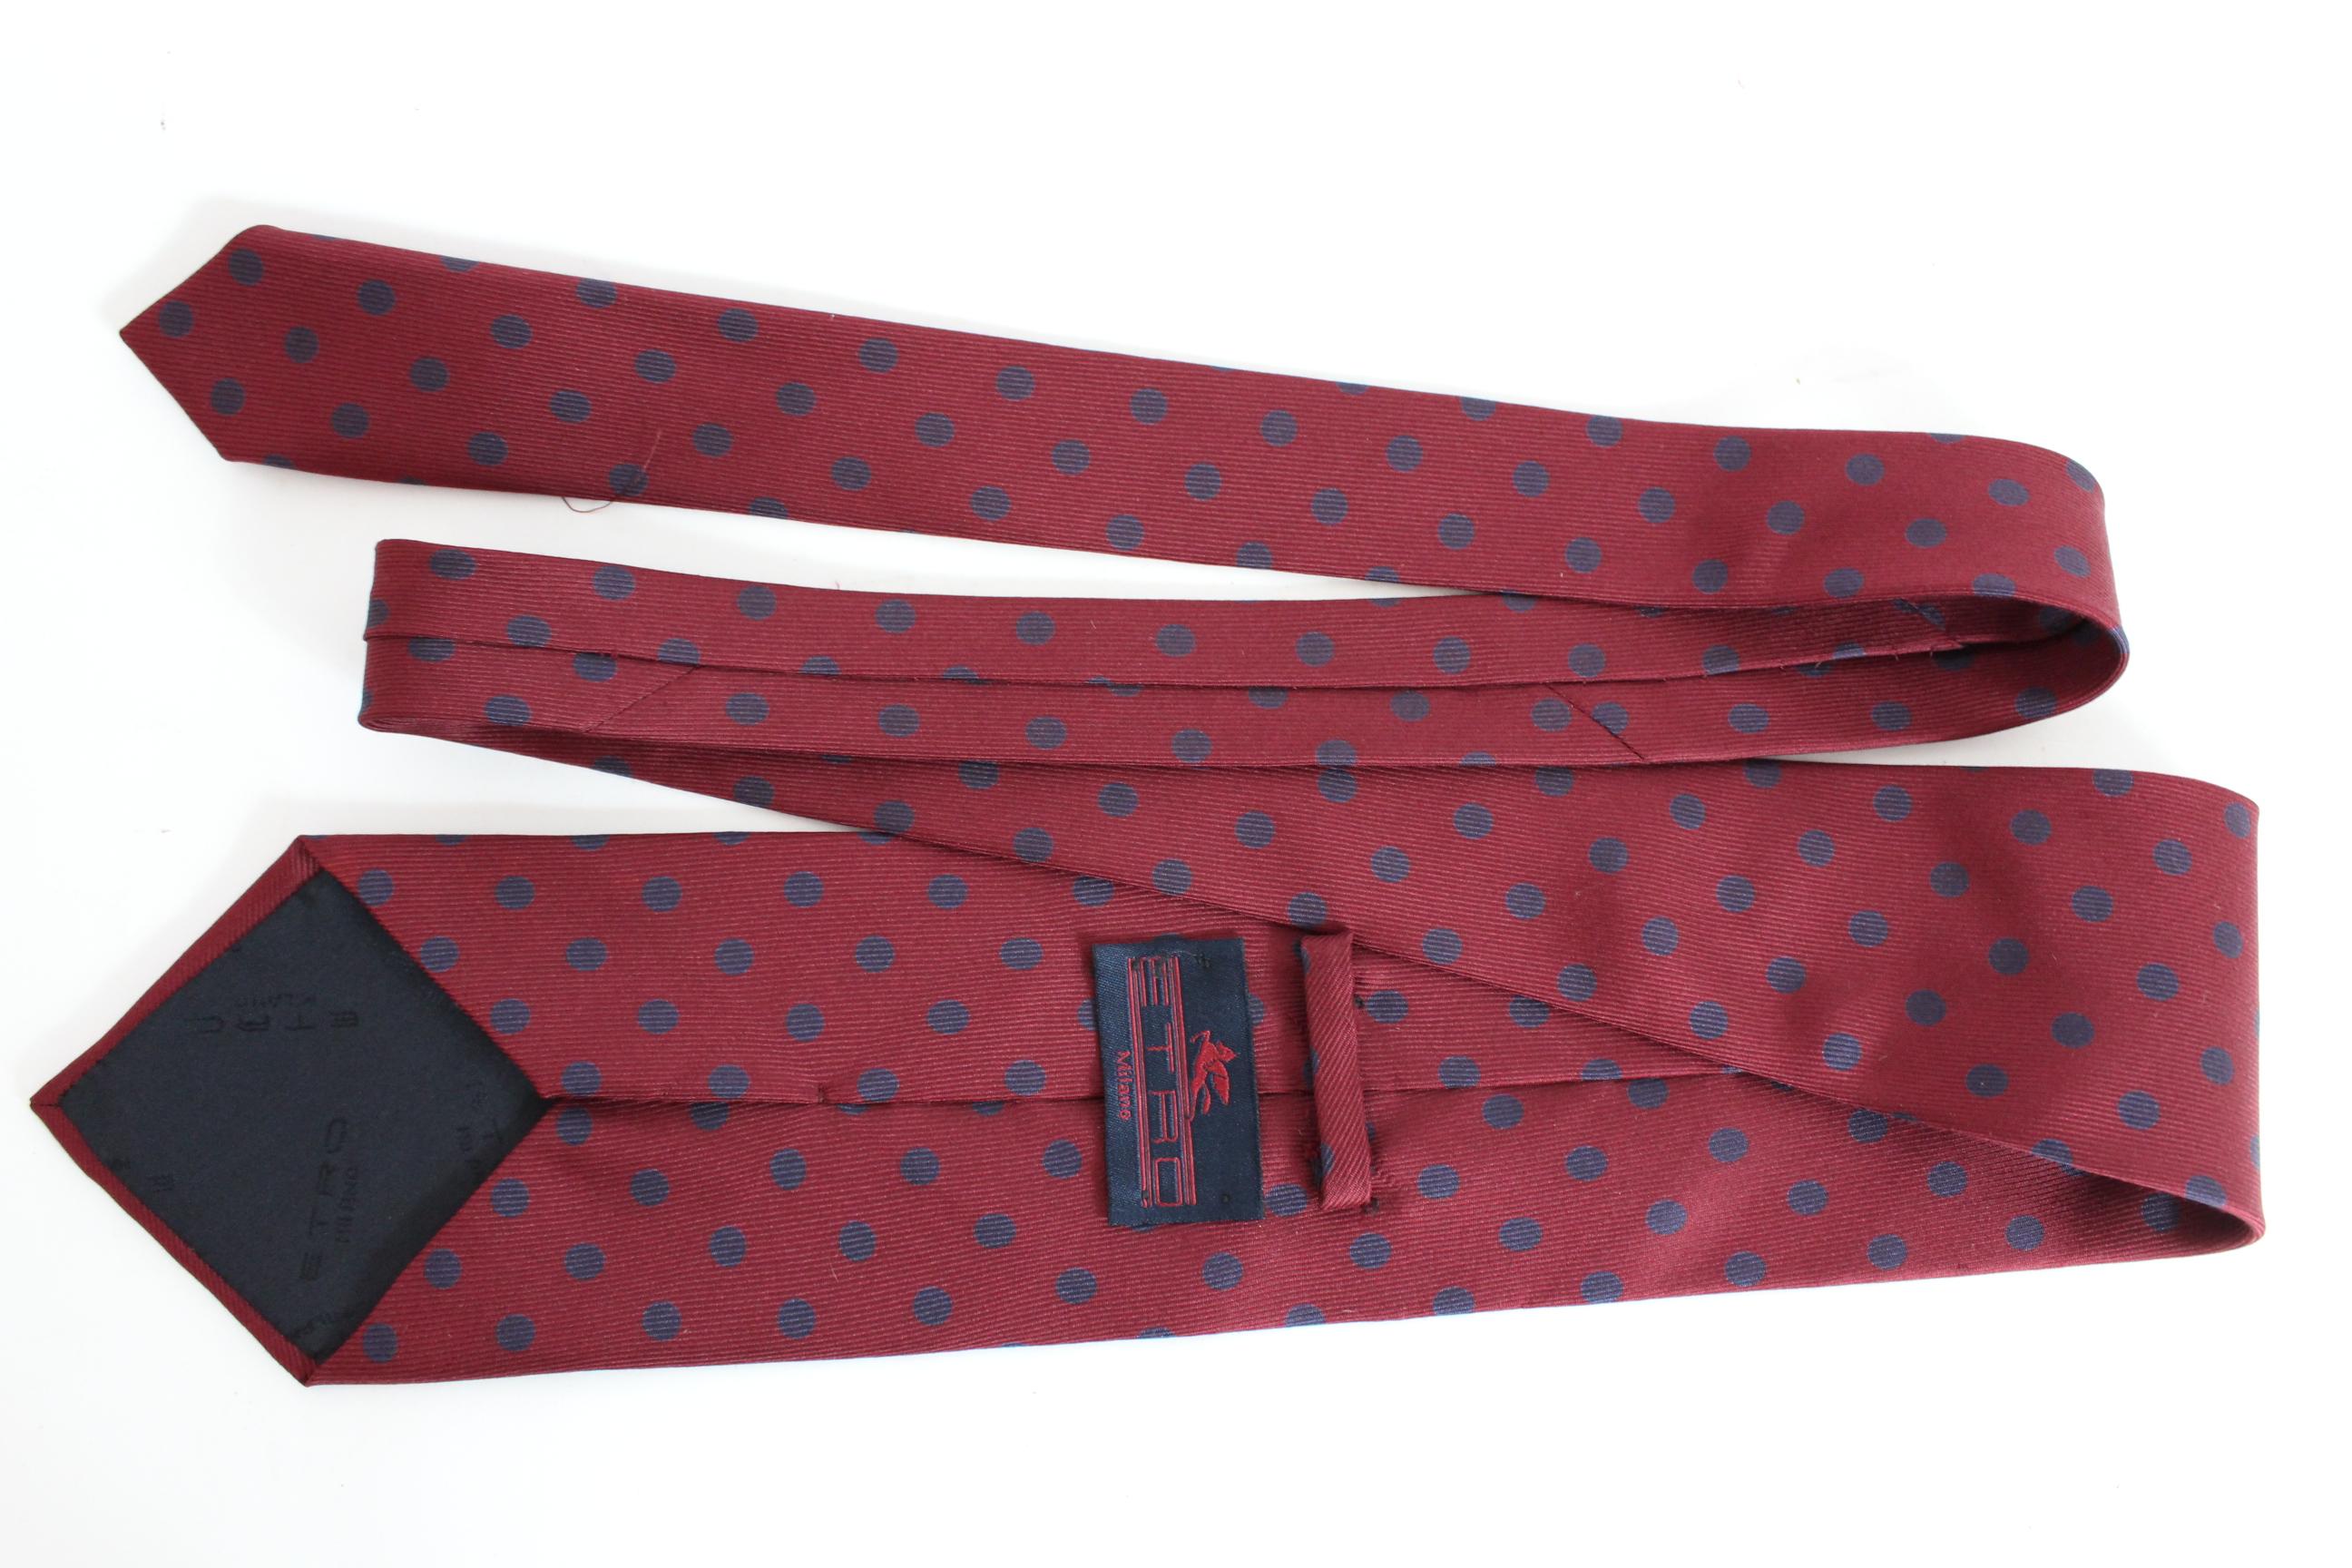 Etro 90s vintage elegant tie. Wide classic model. Red color with blue polka dots. 100% silk. Made in Italy. Excellent vintage conditions.

Length: 150 cm

Width: 10 cm